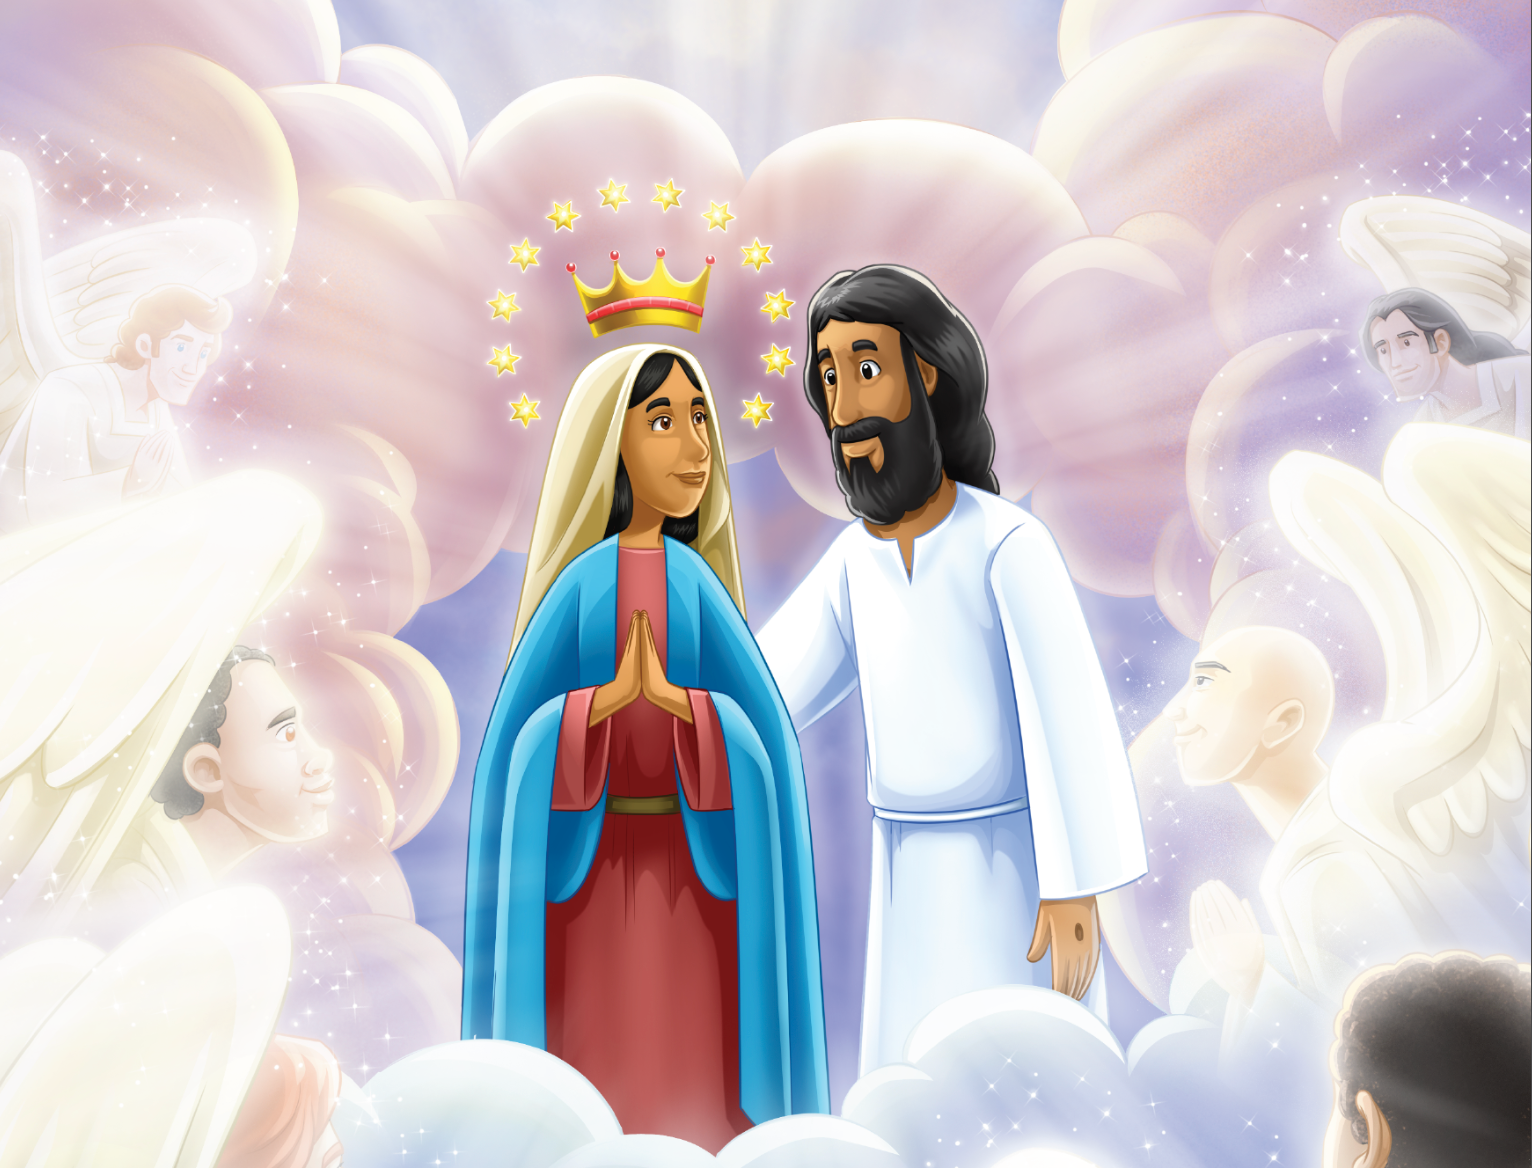 Celebrating the Queenship of Mary